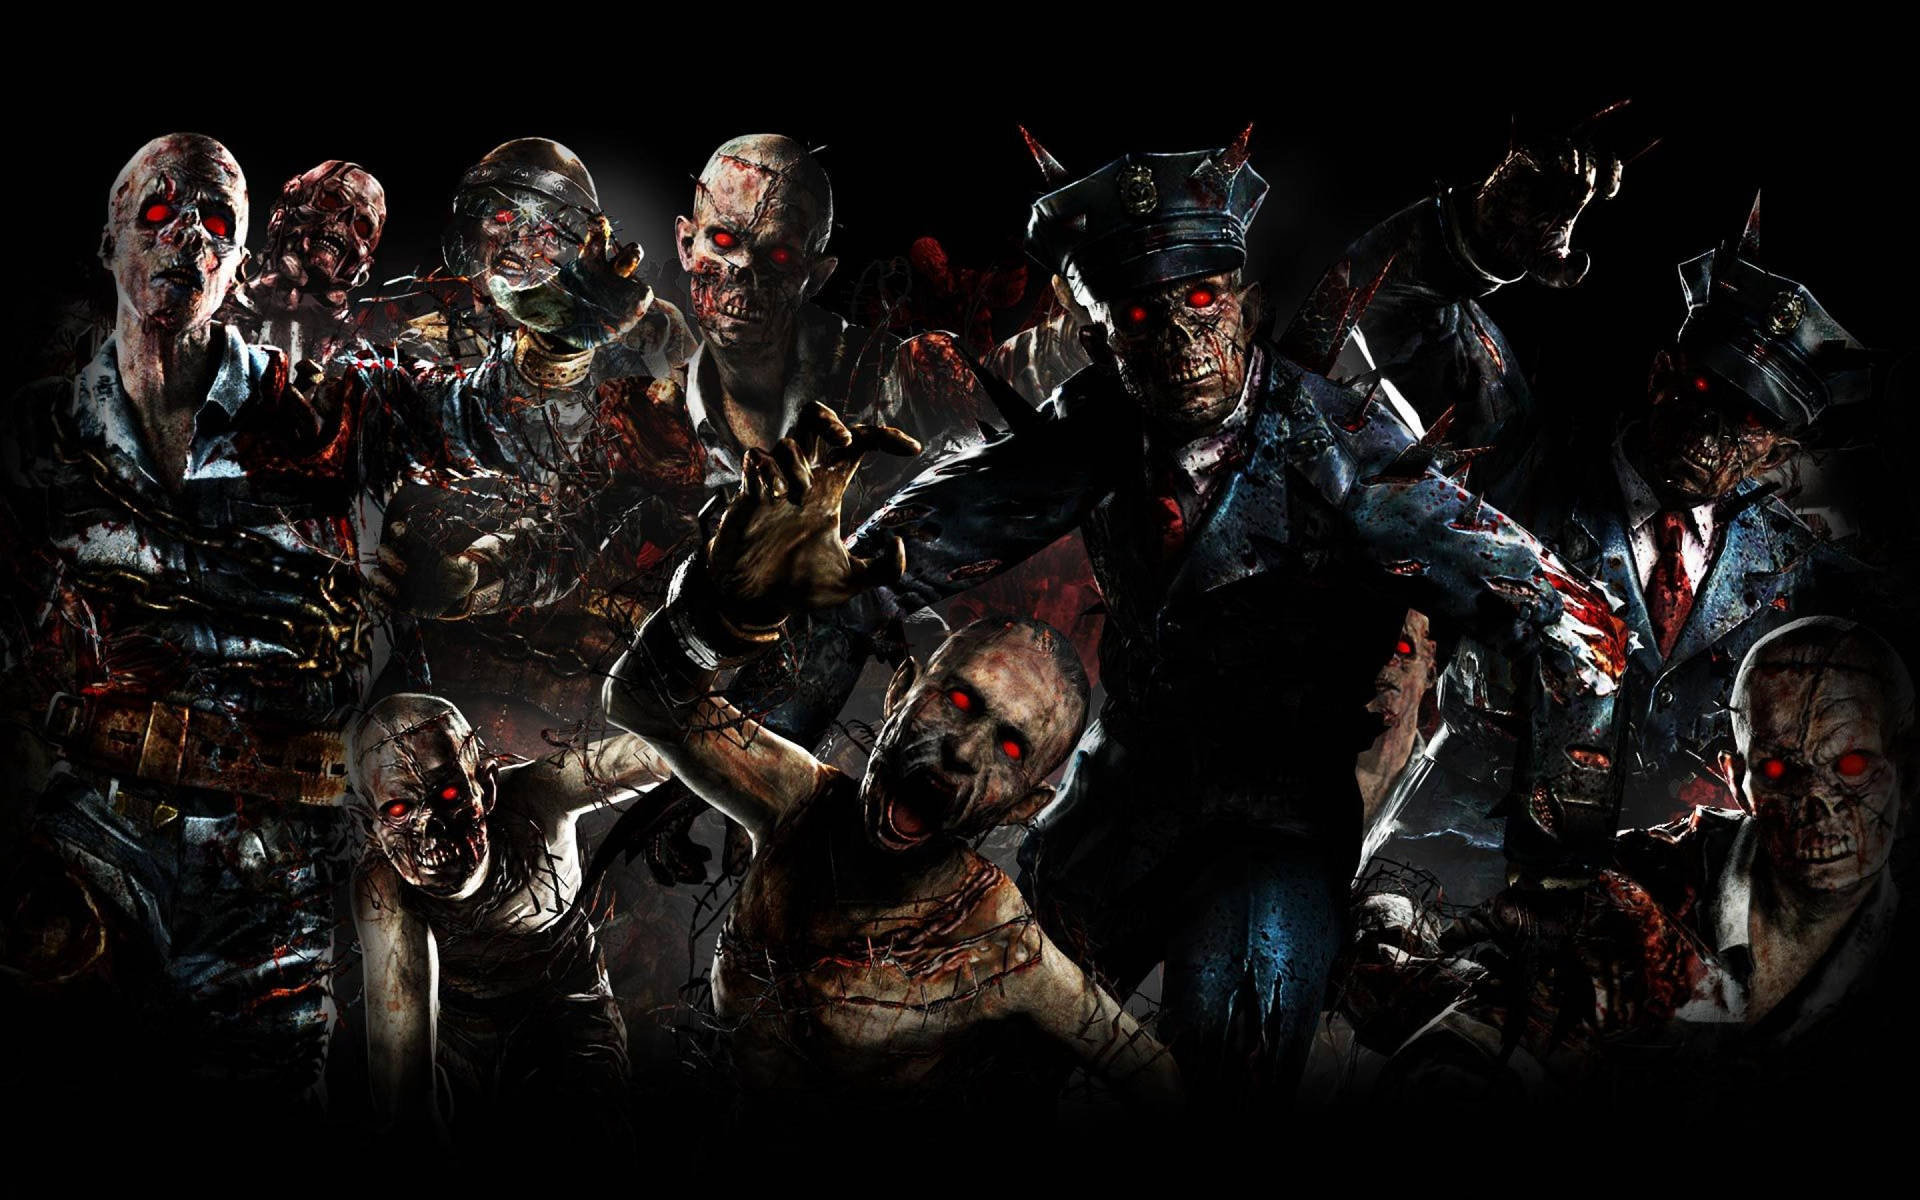 Zombies In A Dark Room With A Group Of Zombies Wallpaper